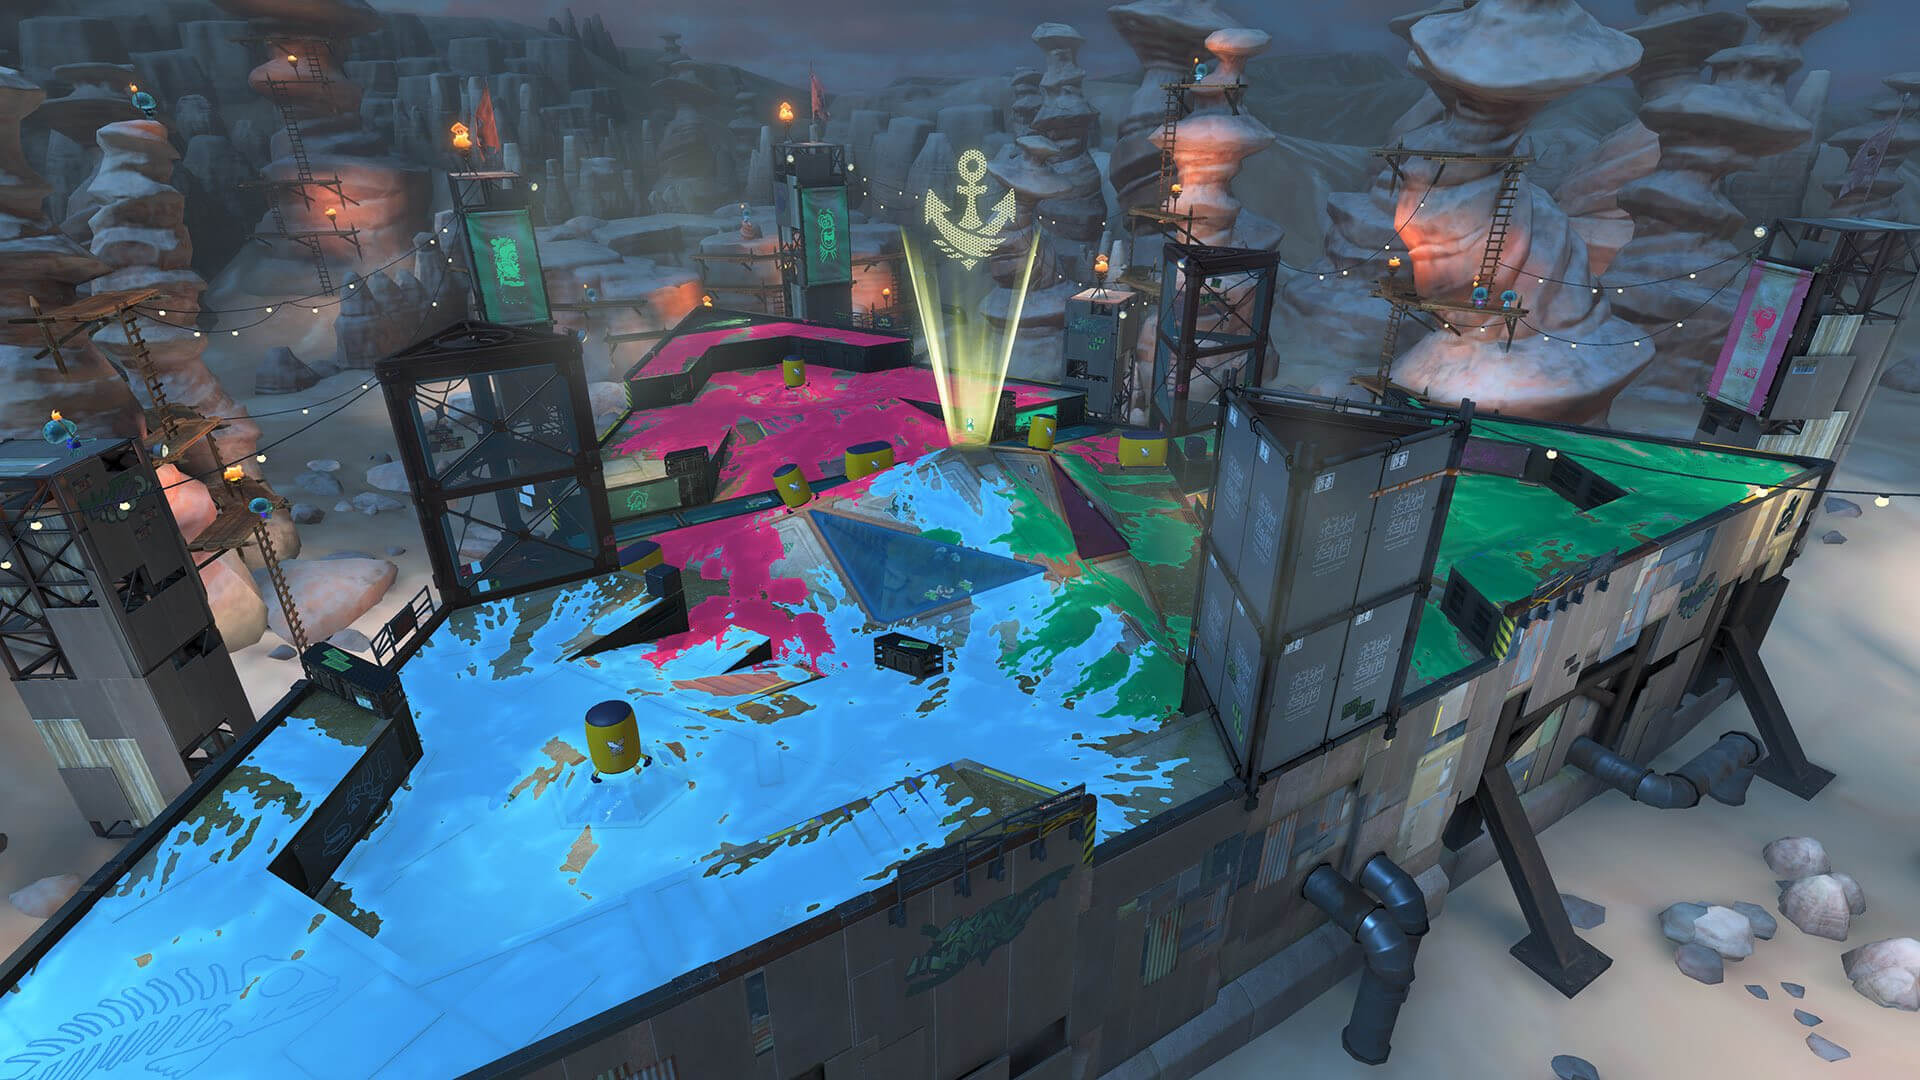 The new Scorch Gorge, which features a Triforce to commemorate the Splatoon 3 Zelda Splatfest